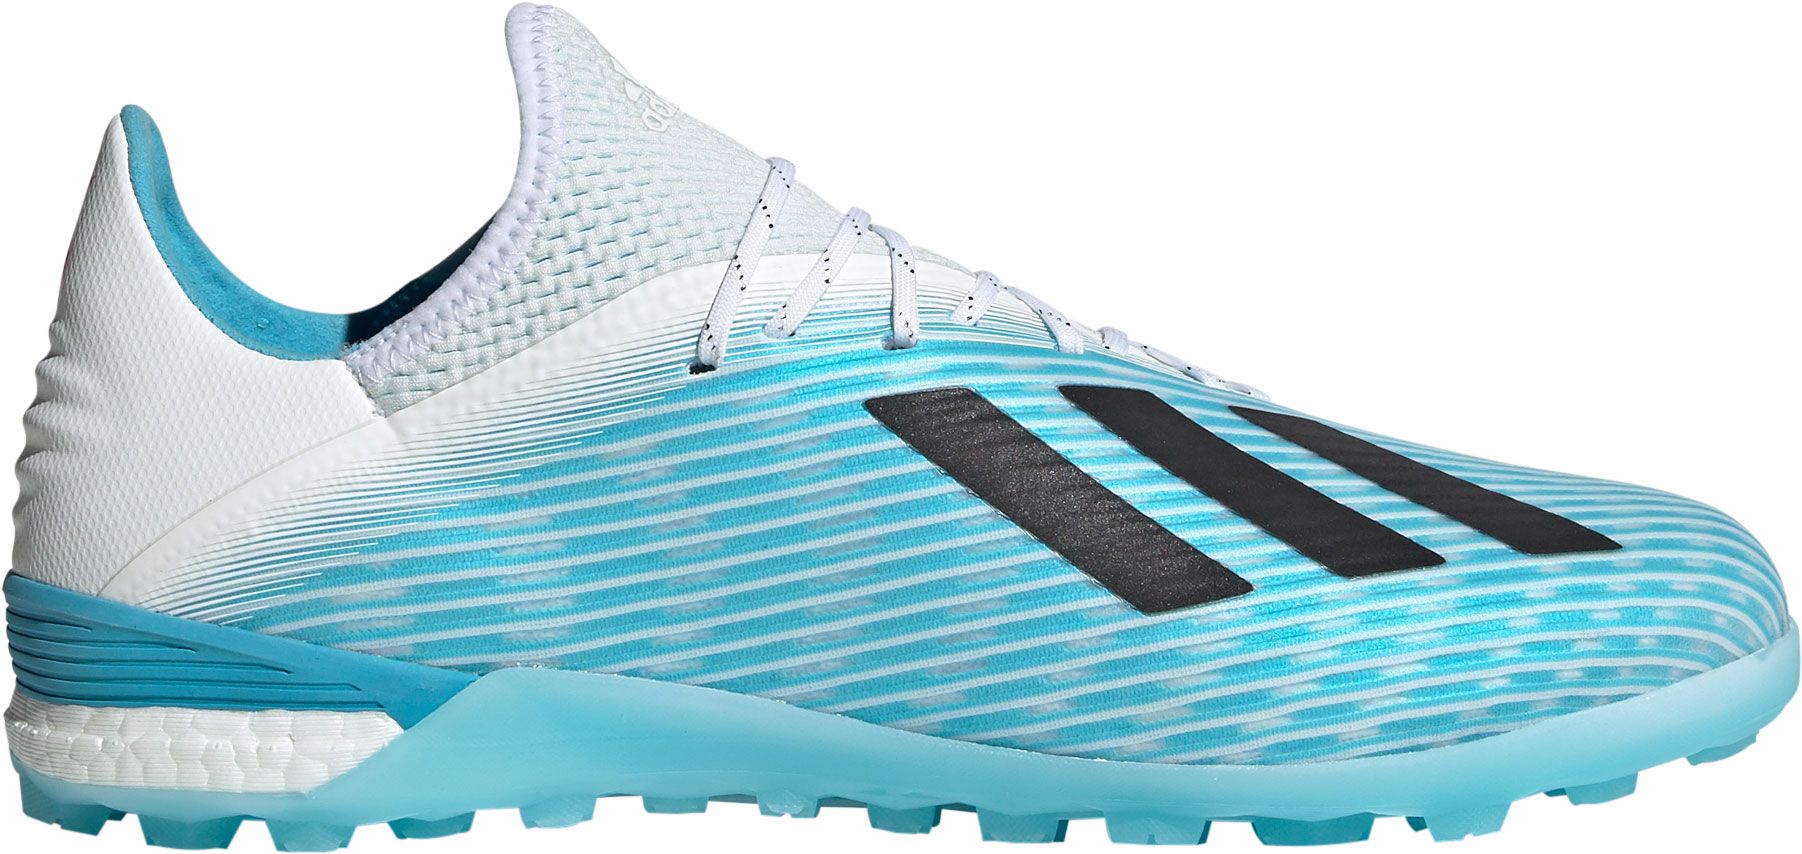 adidas shoes soccer